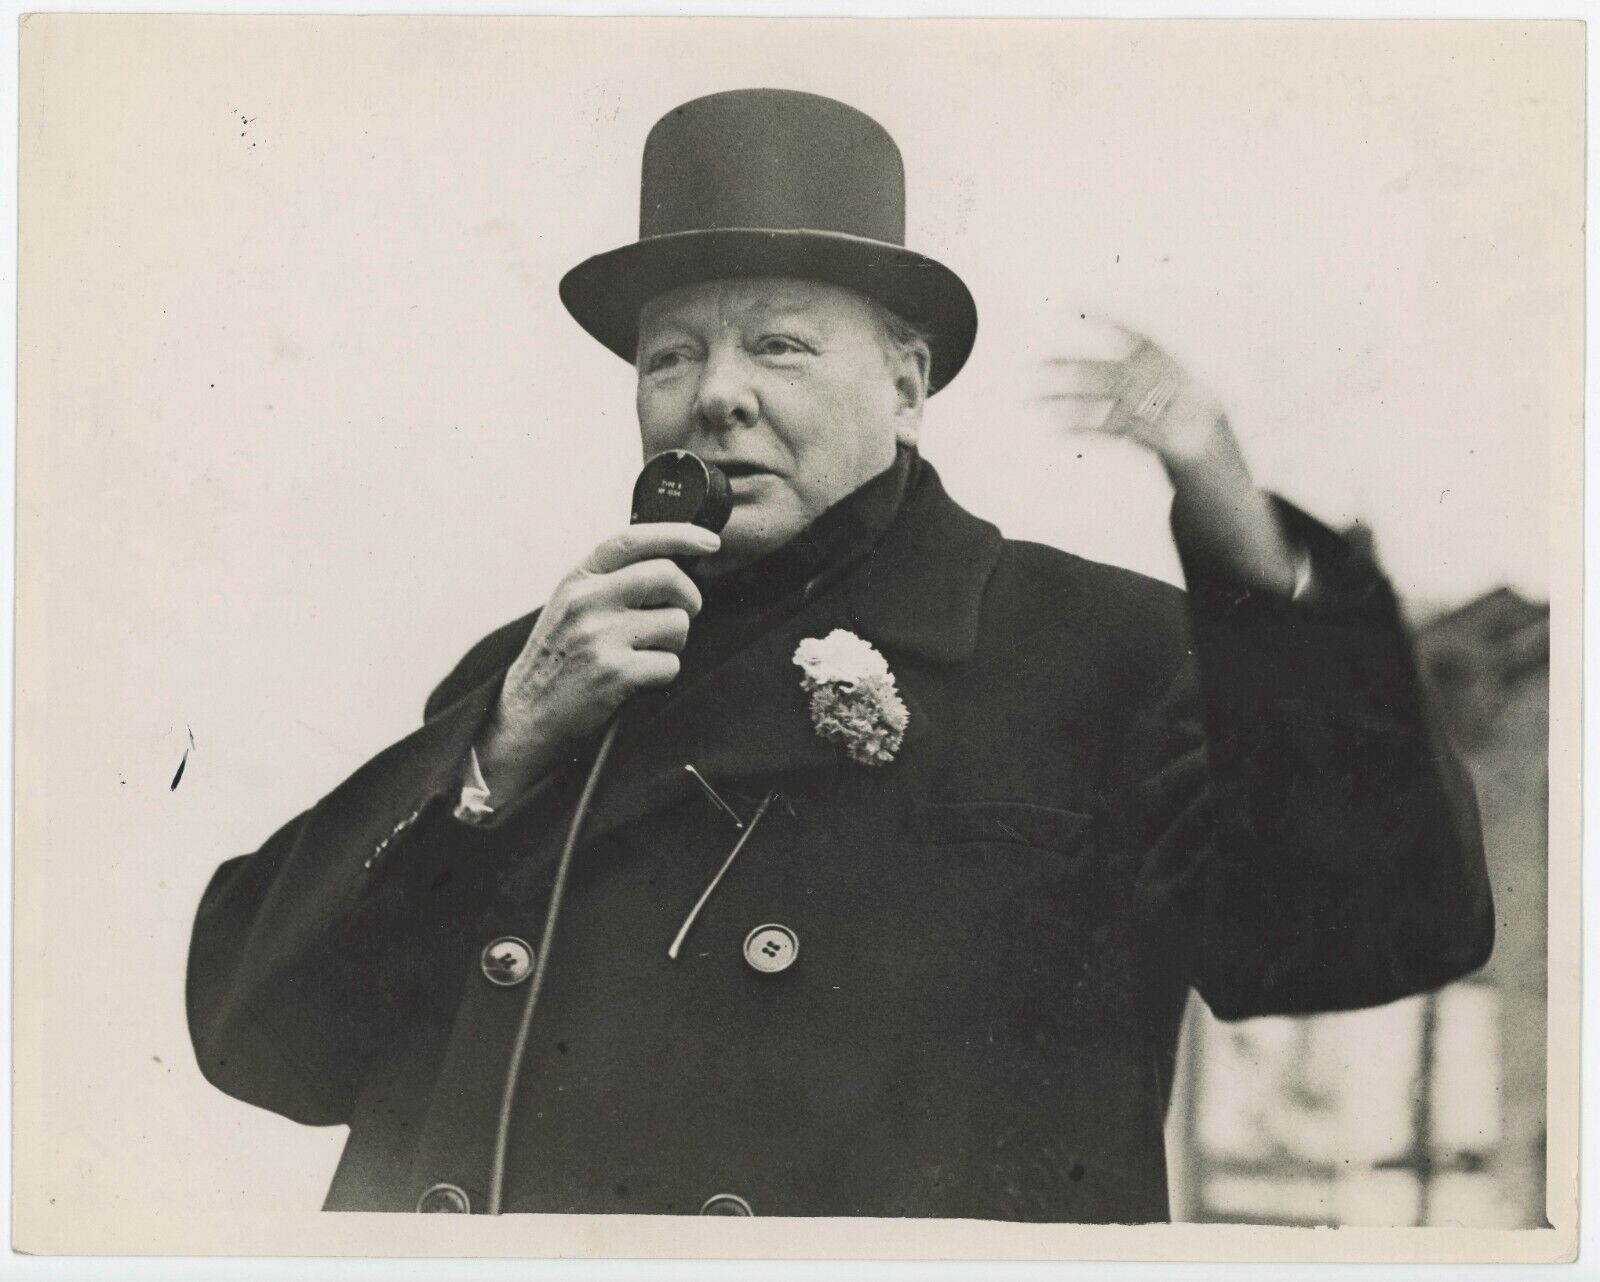 Early July 1945 press photo of Churchill on campaign for the General Election